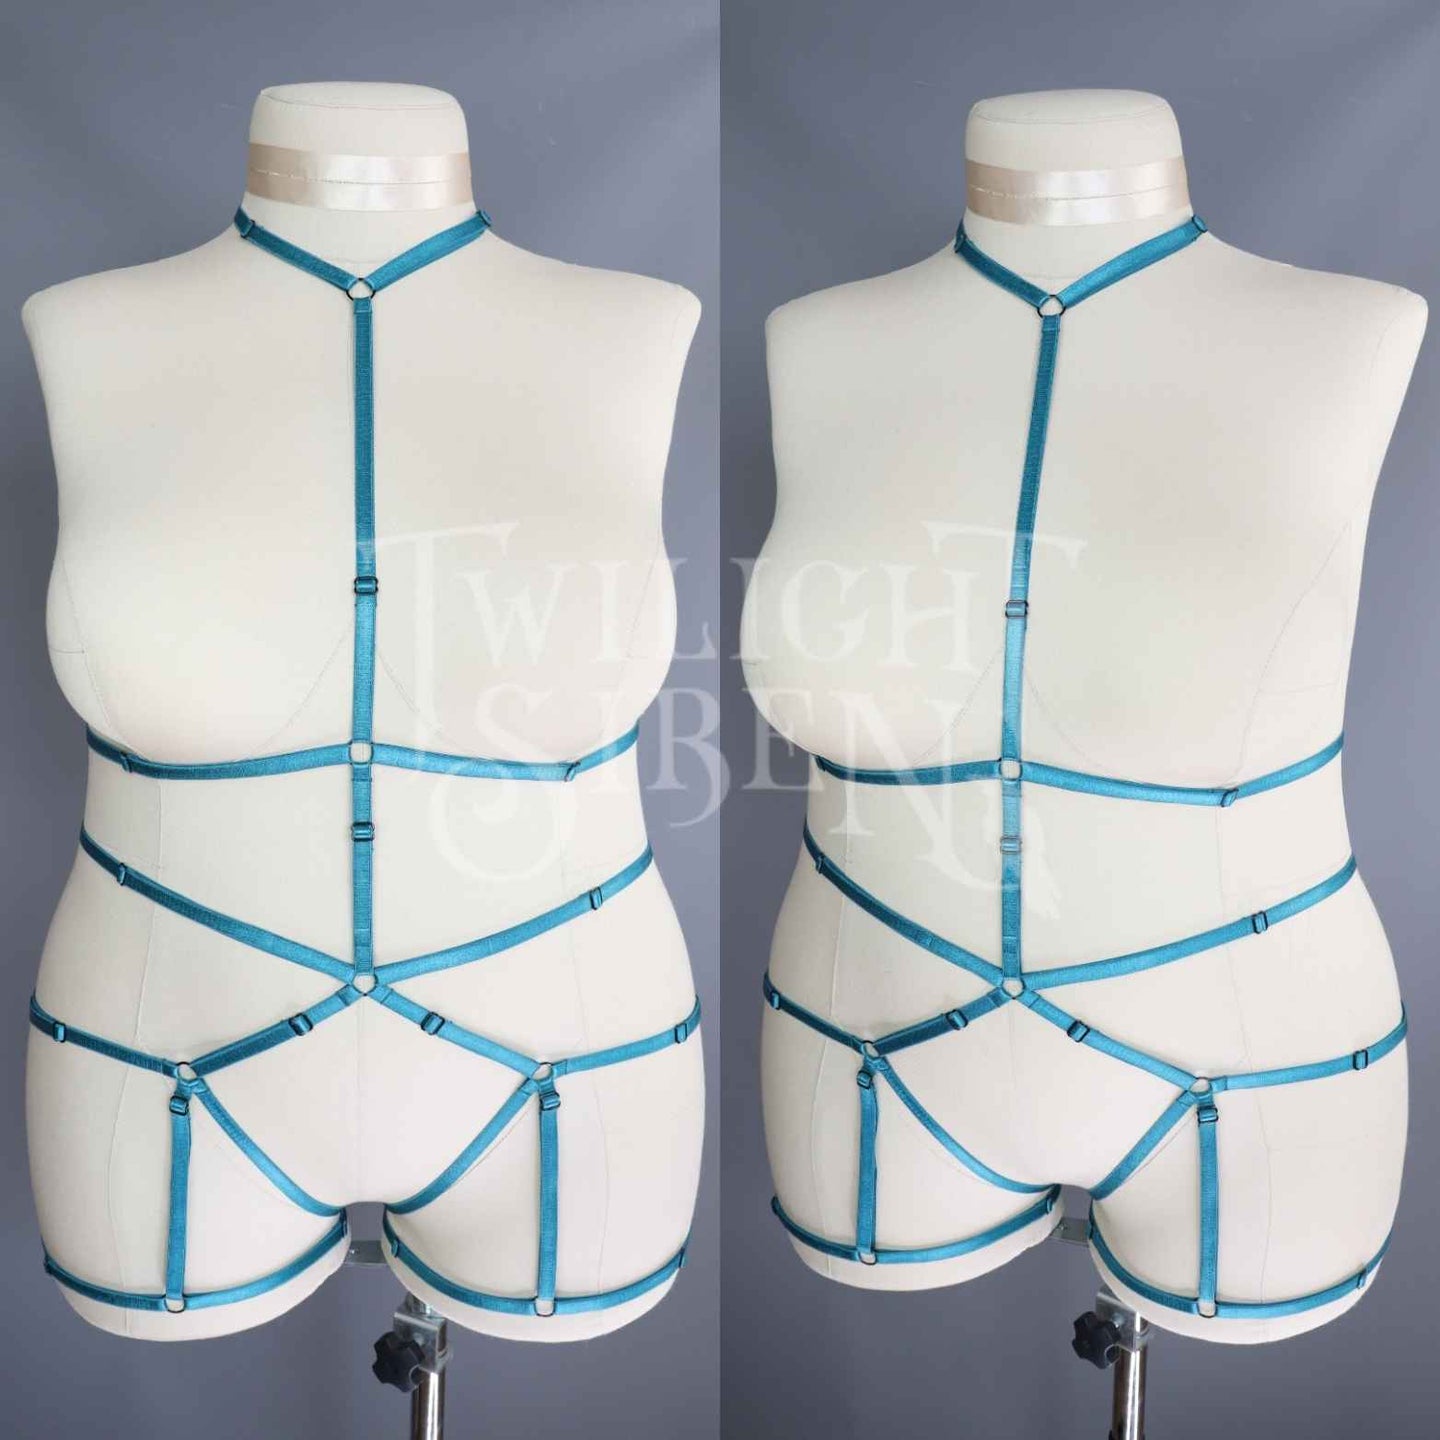 JADE BODY HARNESS OUVERT PLAYSUIT TEAL GREEN -  DEVELOPMENT SAMPLE SIZE UK 24-26 // US 20-22